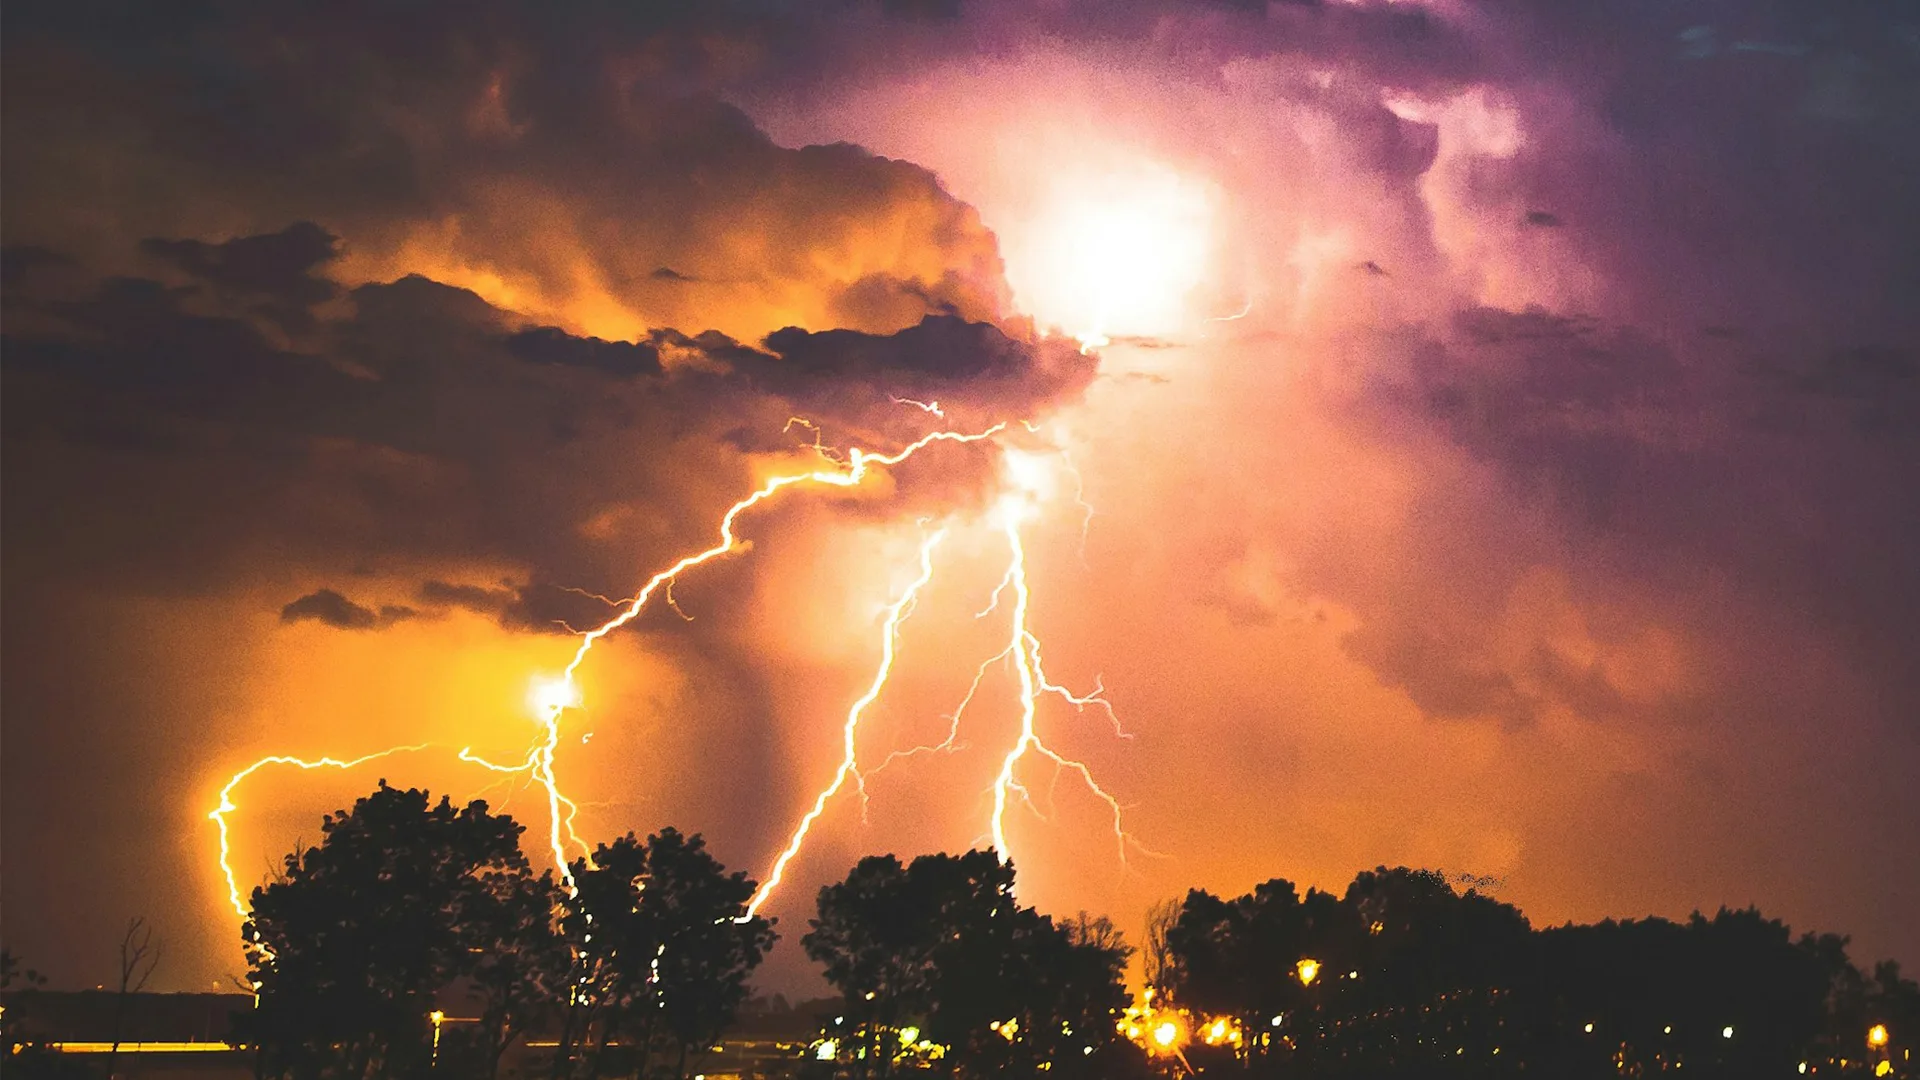 Lightning striking at night which makes the clouds appear purple and orange